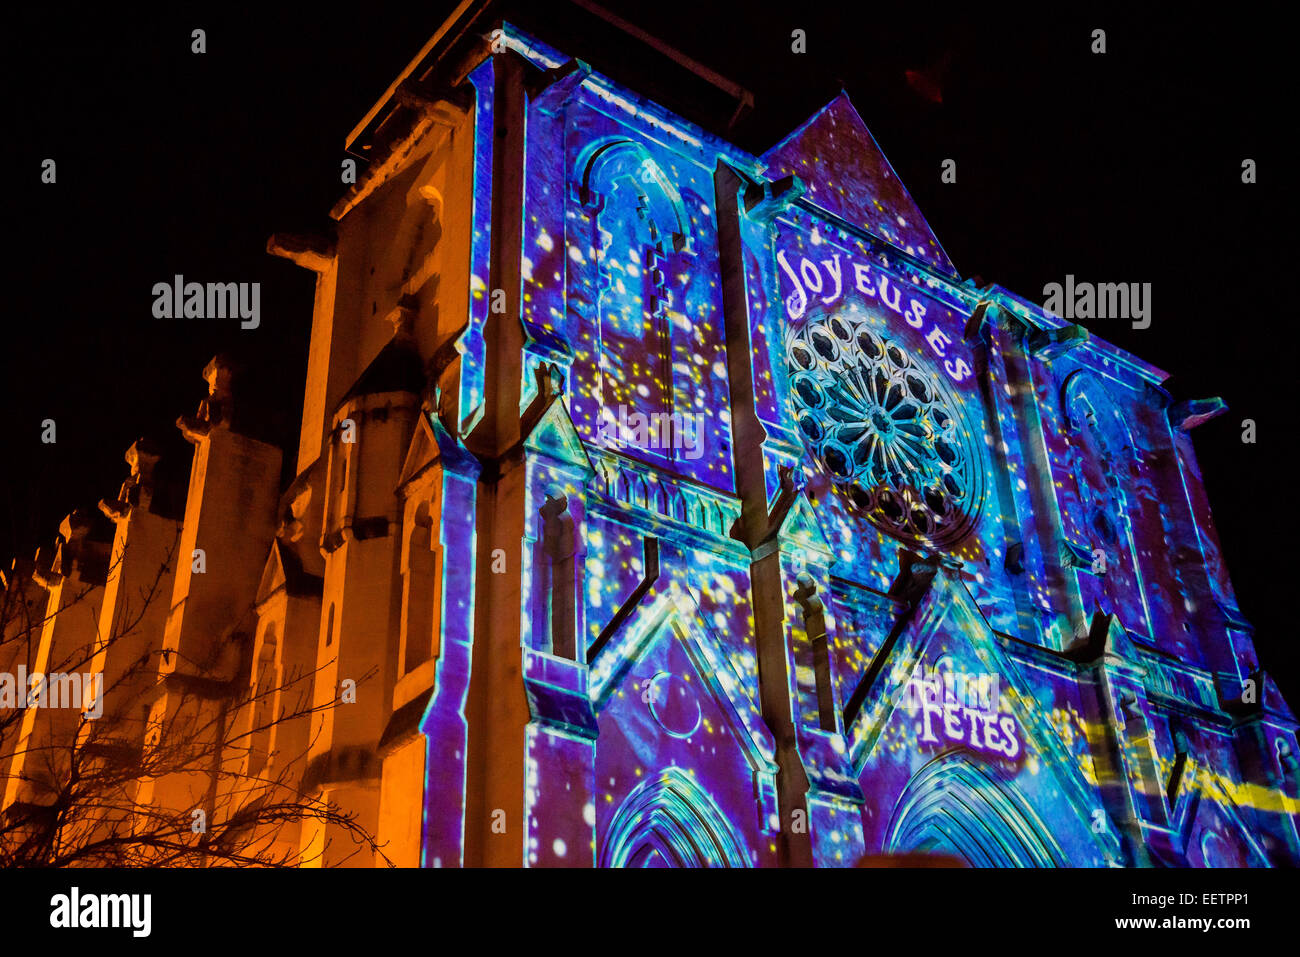 Sound and light show projection on Saint Roch Church during Christmas, Montpellier, France Stock Photo